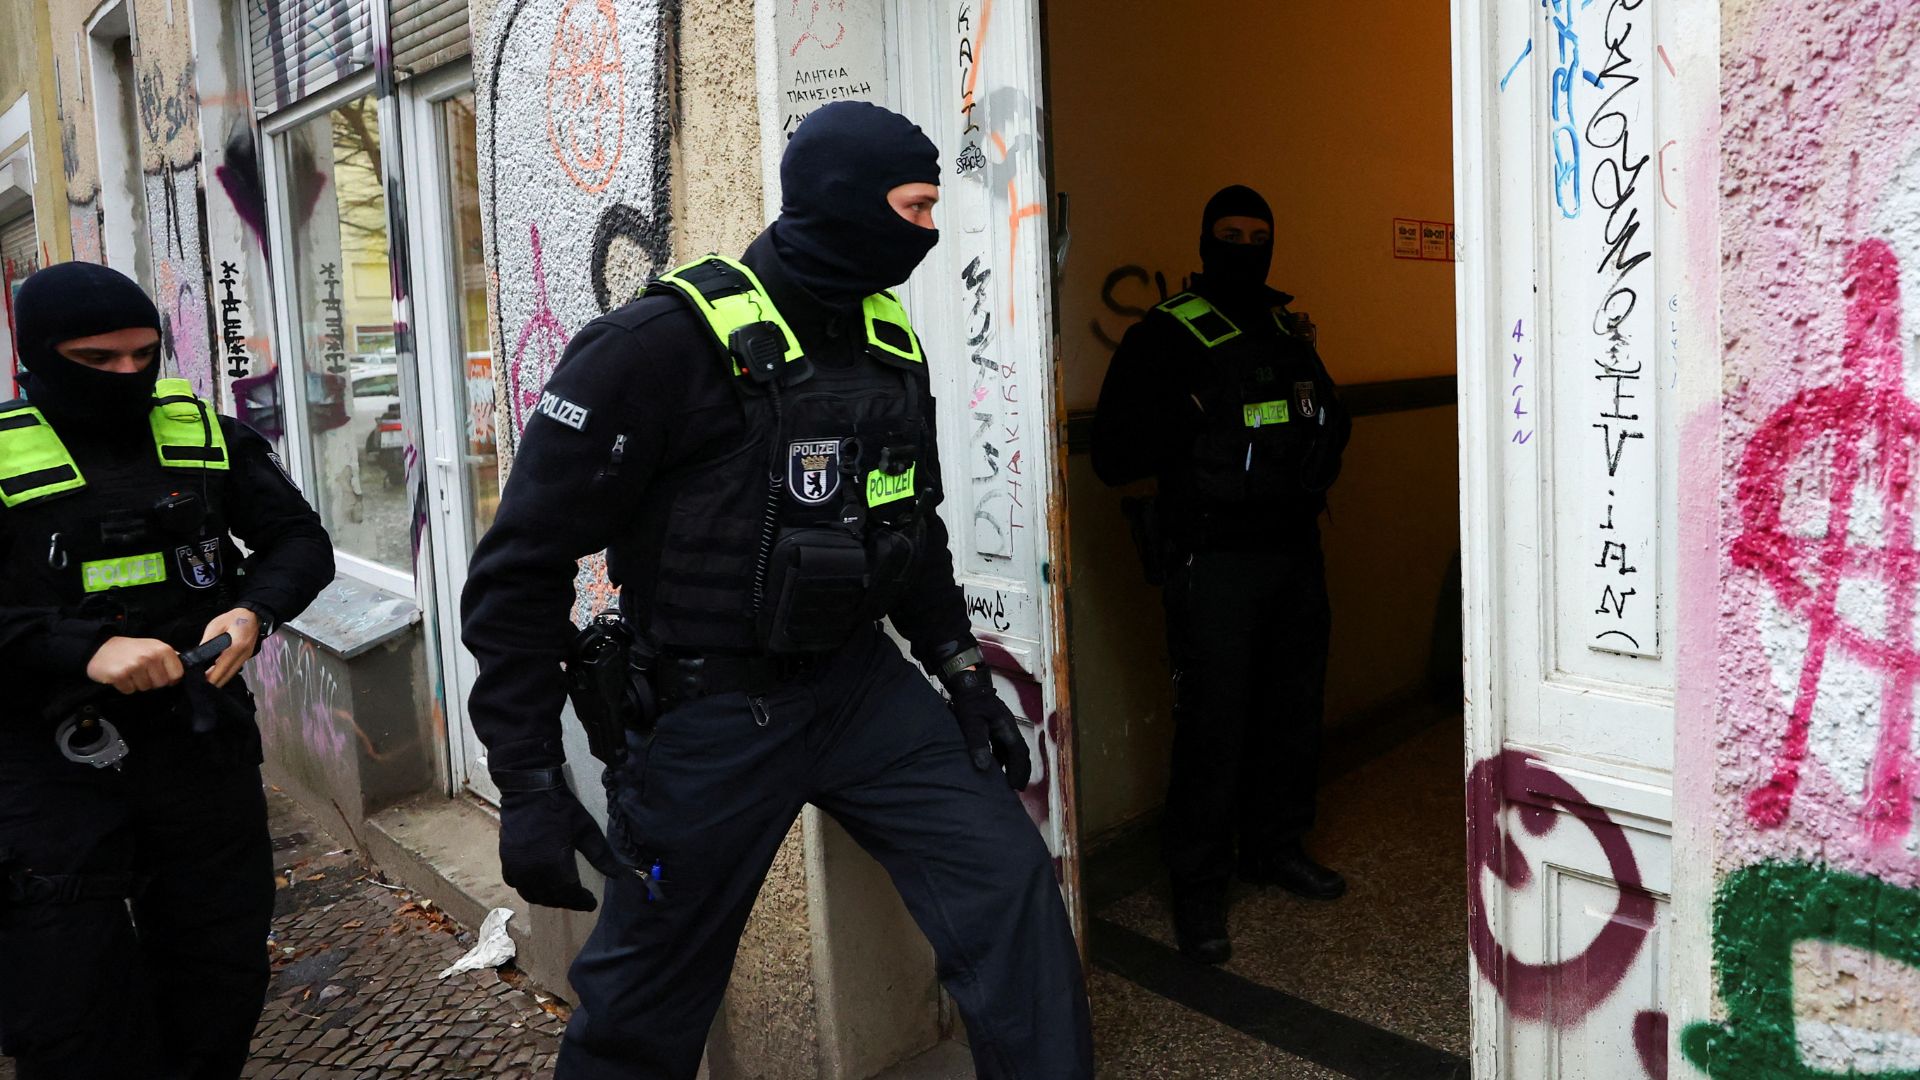 A German police officer enters an apartment building during a raid against people supporting Hamas in Berlin. /Fabrizio Bensch/Reuters

